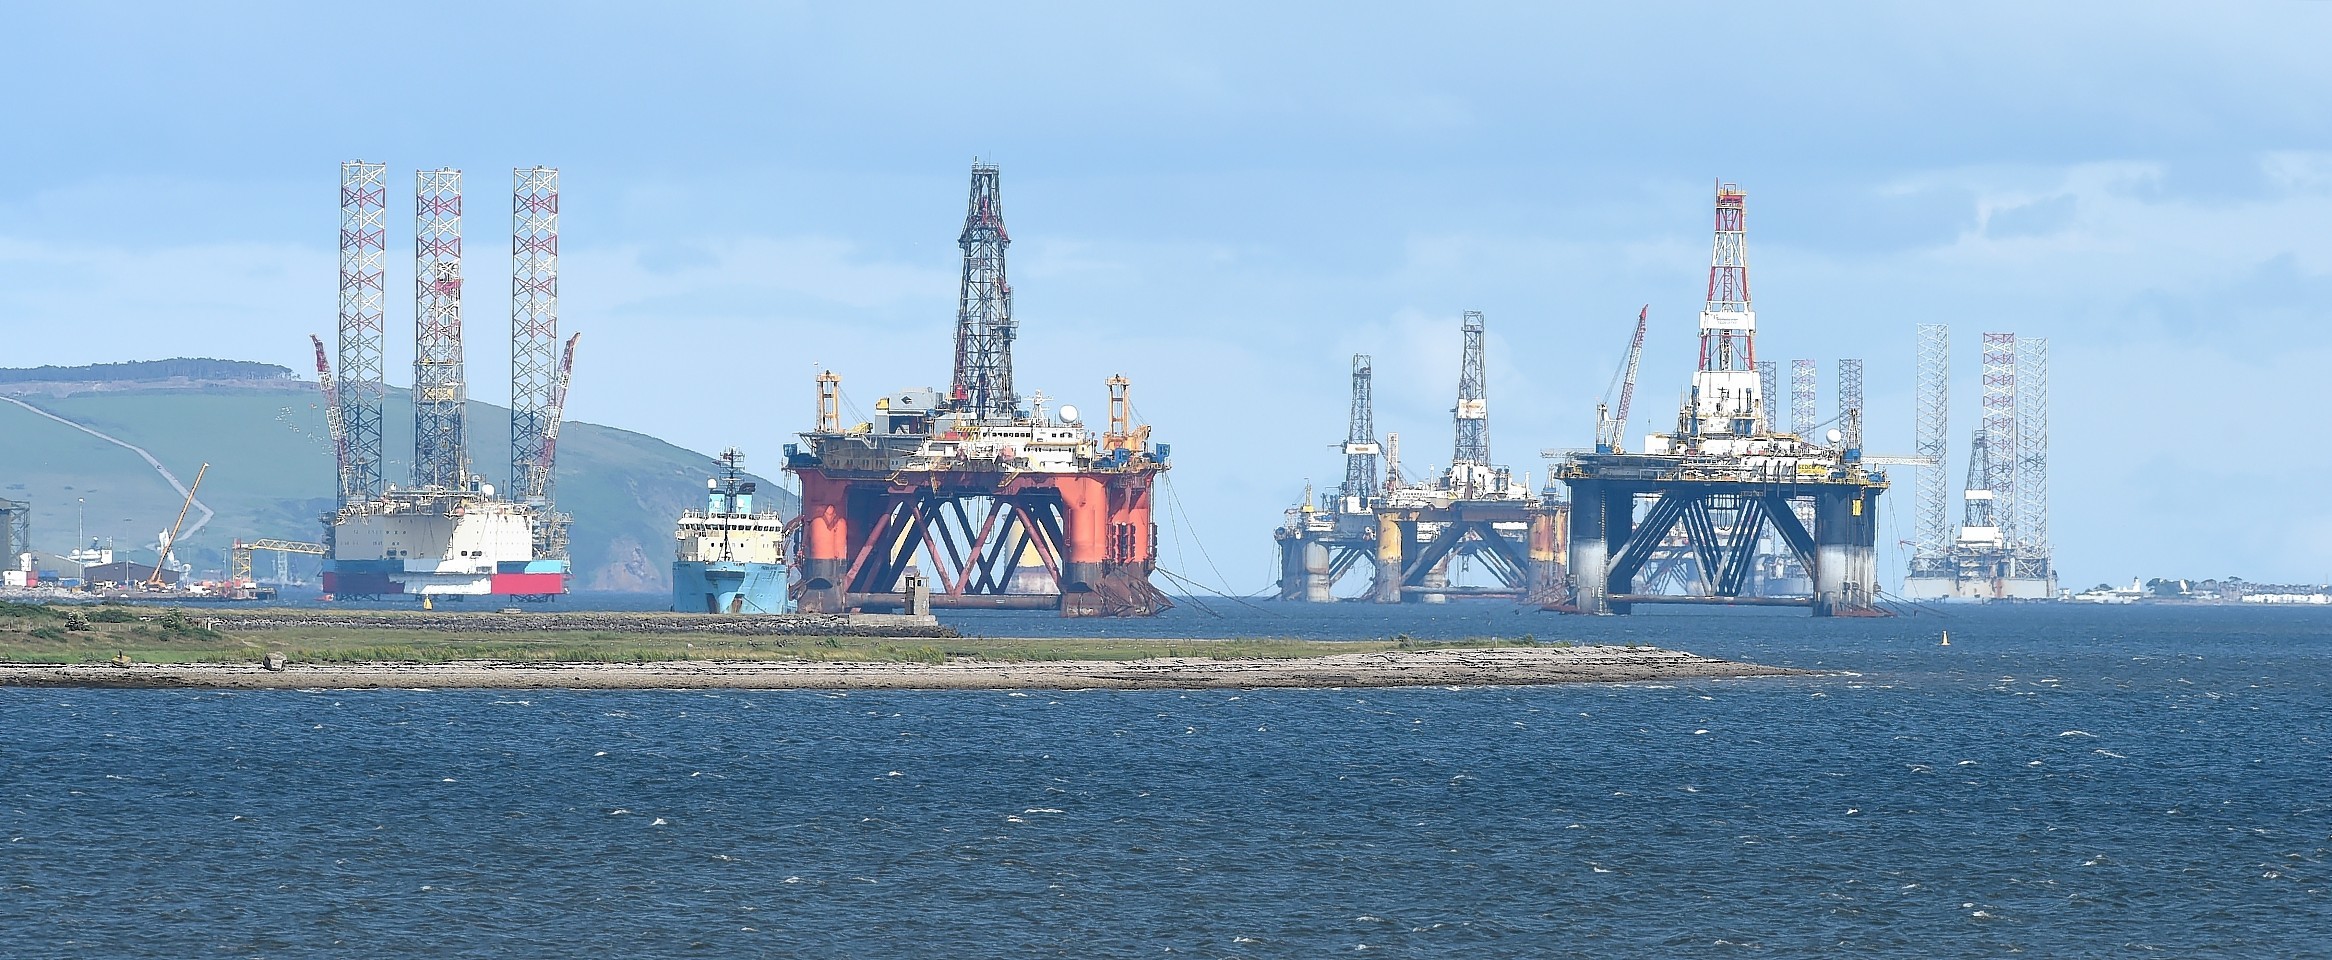 Oil rigs stacked in the Cromarty Firth